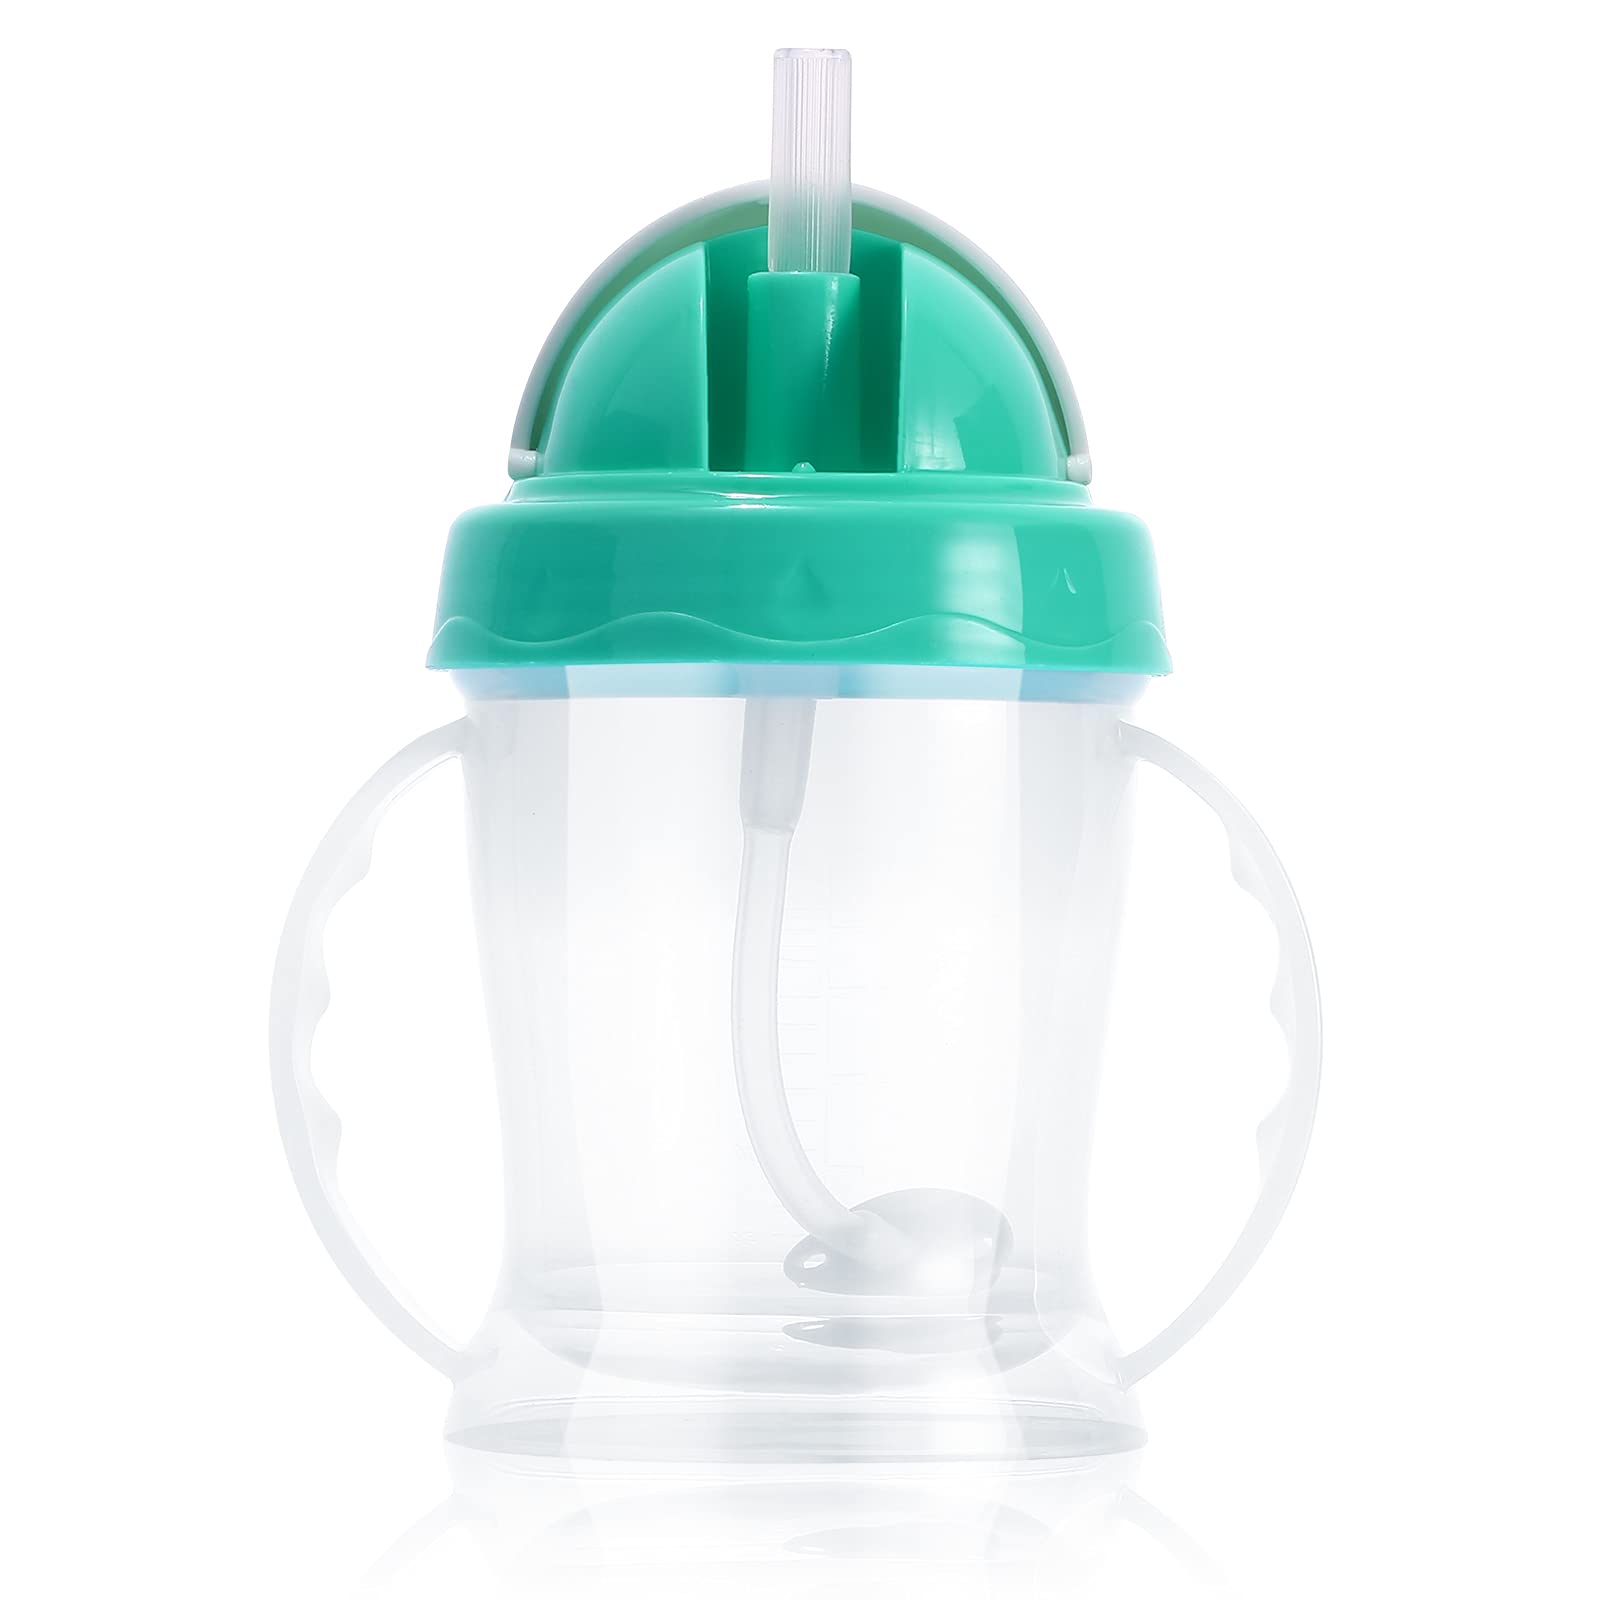 JOYWA Soft Spout Sippy Cups Learner Cup with Weighted Straw Sippy Cup Leak-Proof  Spill-Proof Break-Proof Cups for 6 months+ Toddlers Infant green Green  160.0 Milliliters